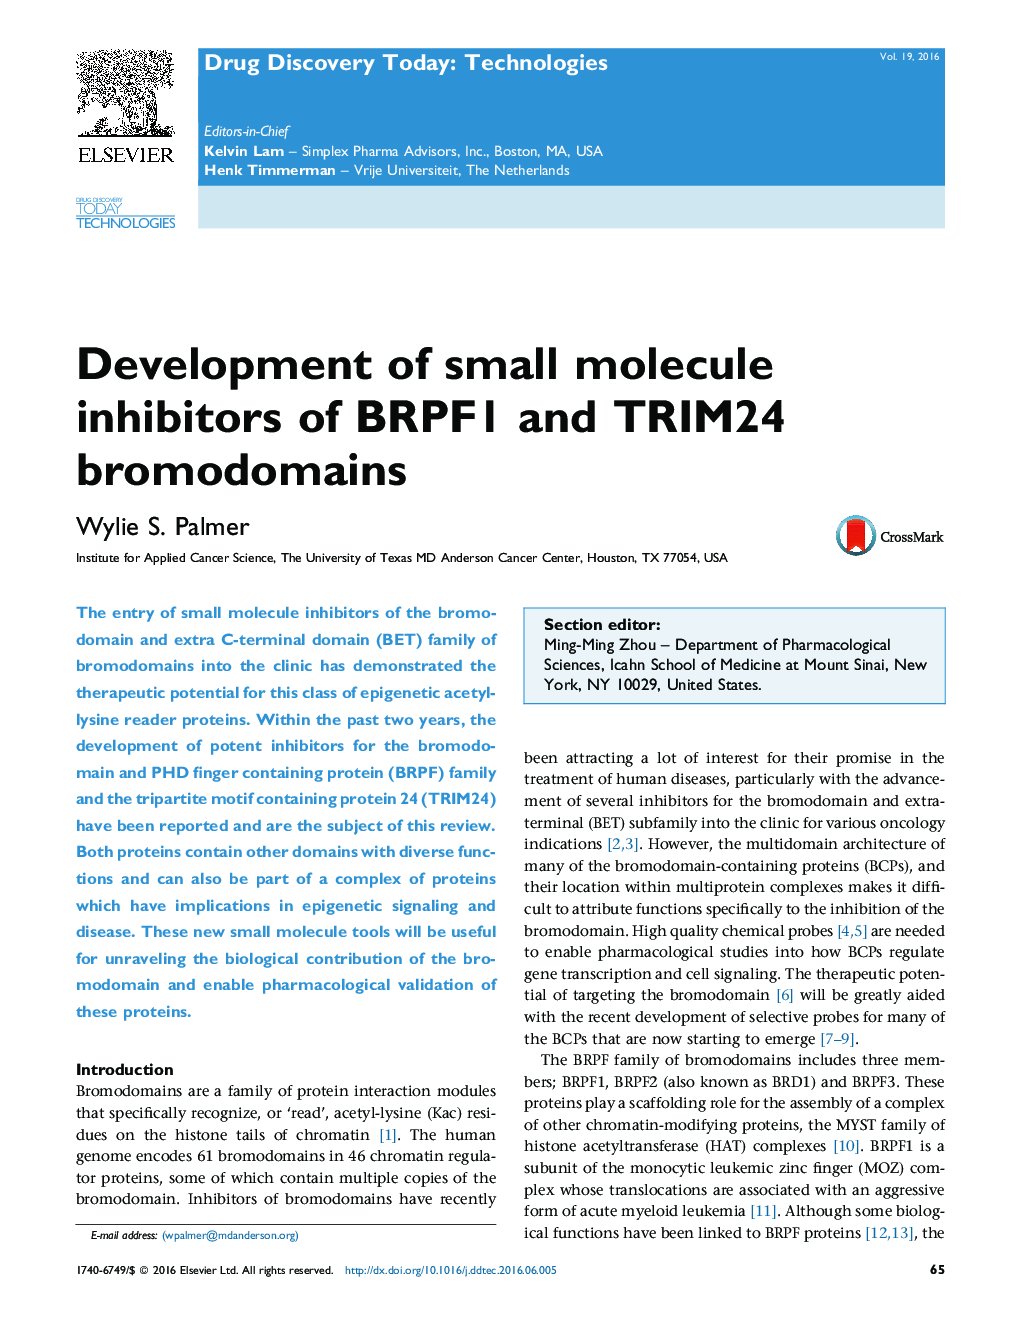 Development of small molecule inhibitors of BRPF1 and TRIM24 bromodomains